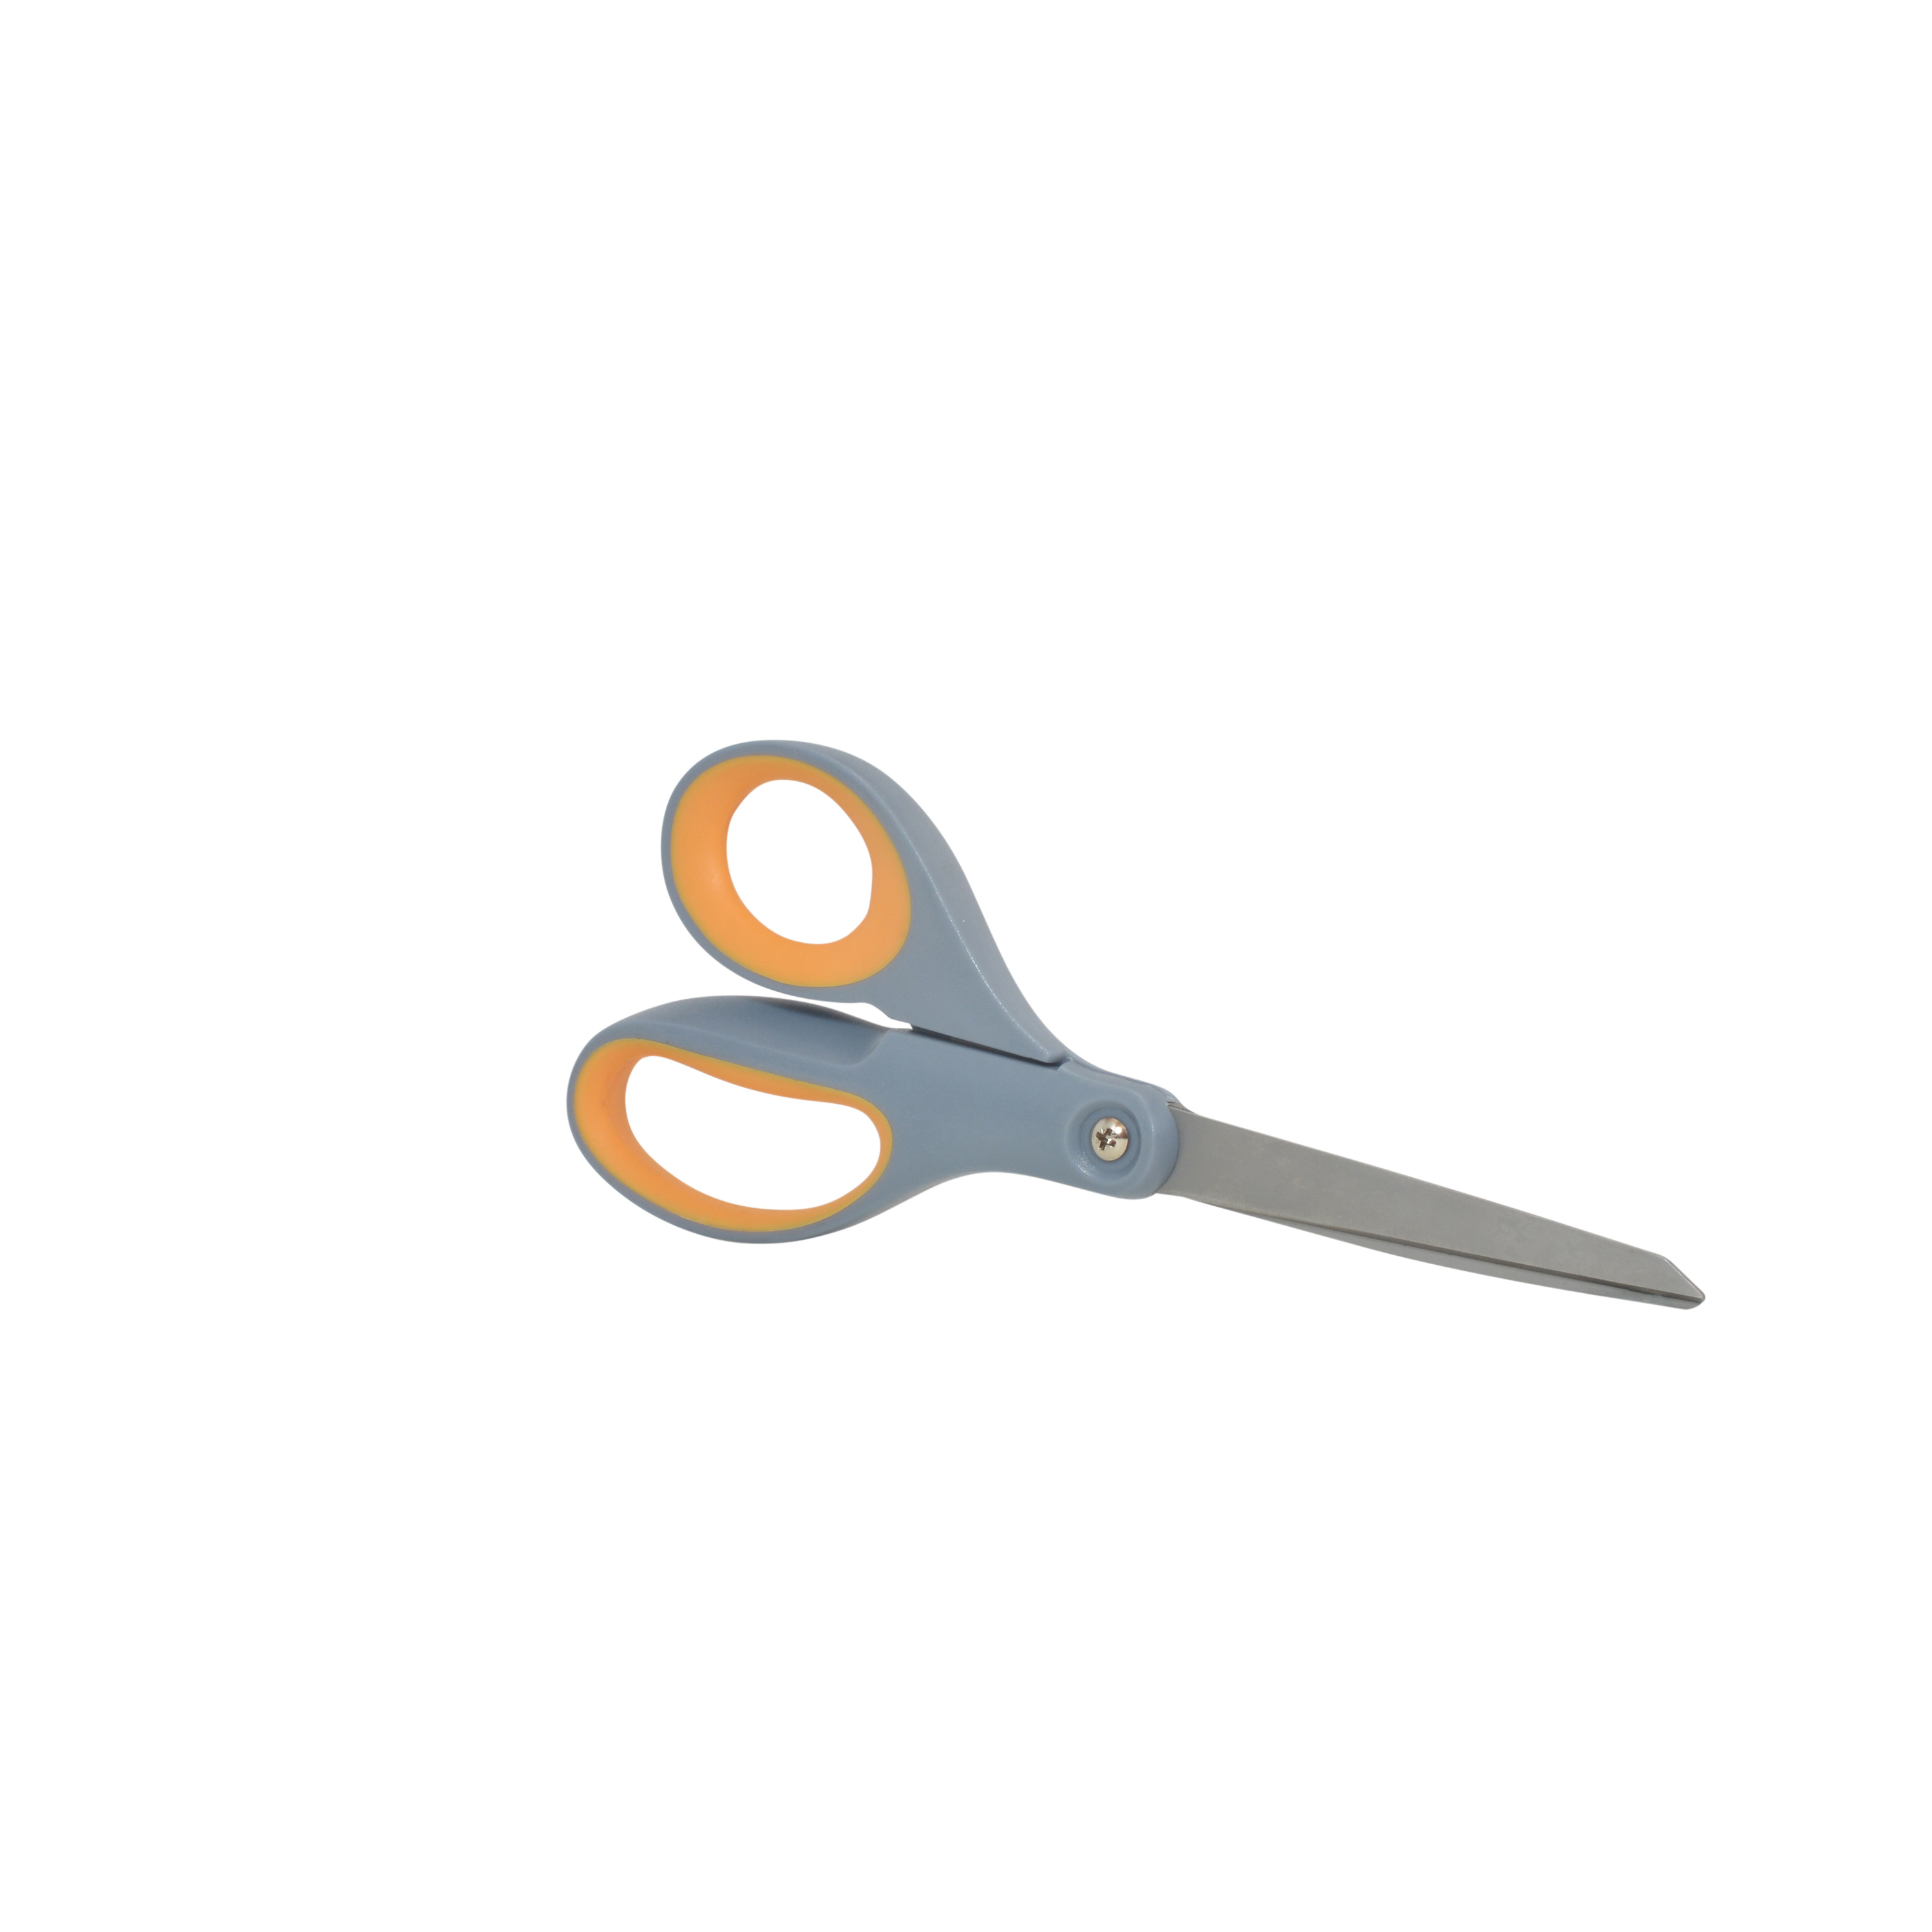 Westcott 13901 8-Inch Titanium Scissors For Office and Home, Yellow/Gray, 2  Pack